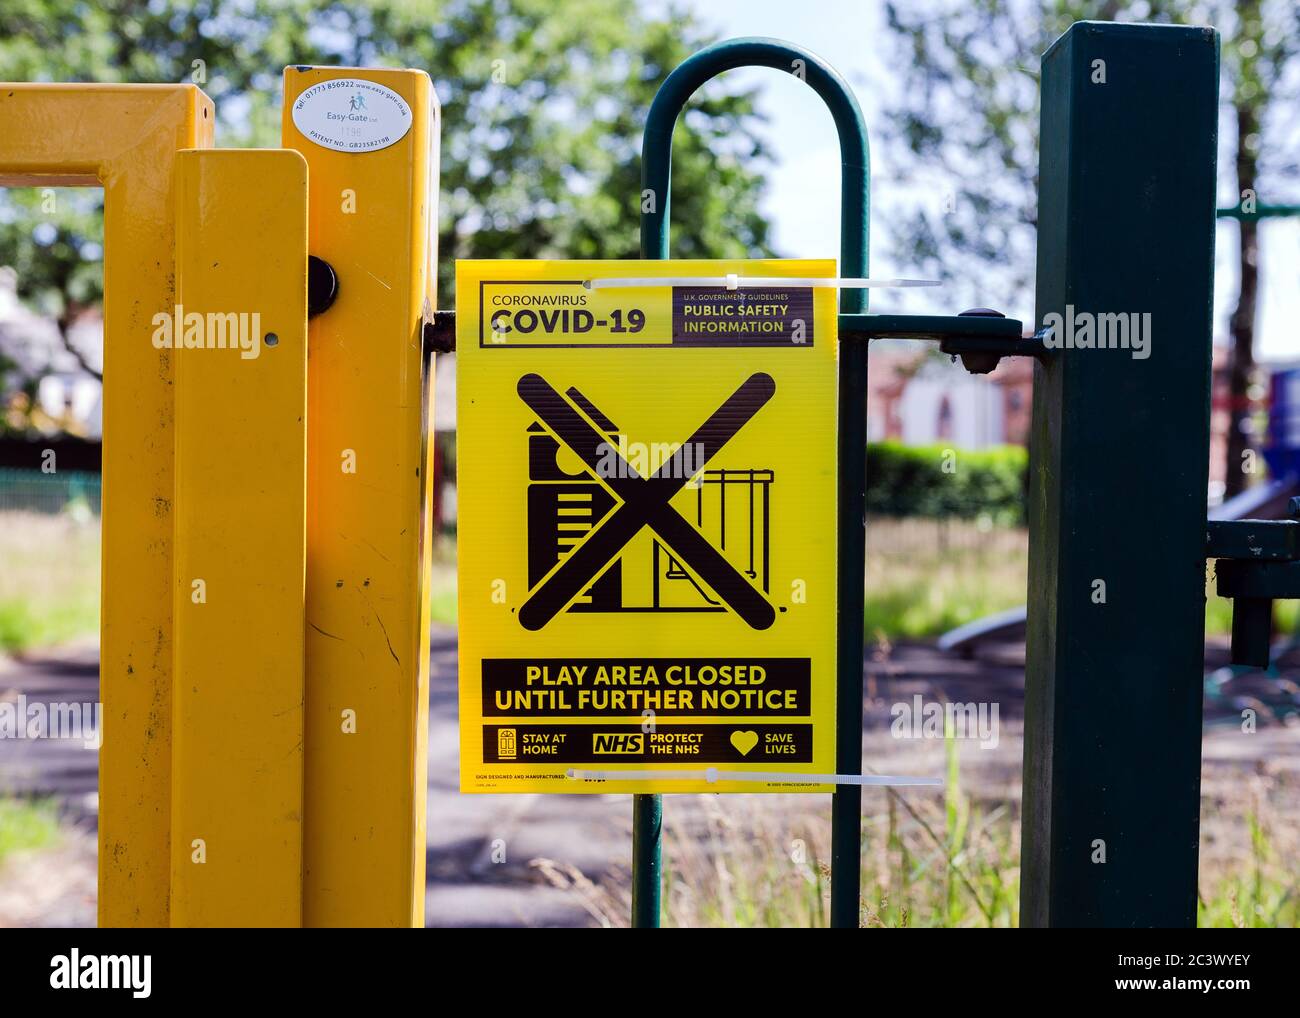 Wales, UK.  22 June 2020. Coronavirus Covid-19 public safety information. Childrens play areas remain closed in Wales during the coronavirus Covid-19 lockdown. Stock Photo